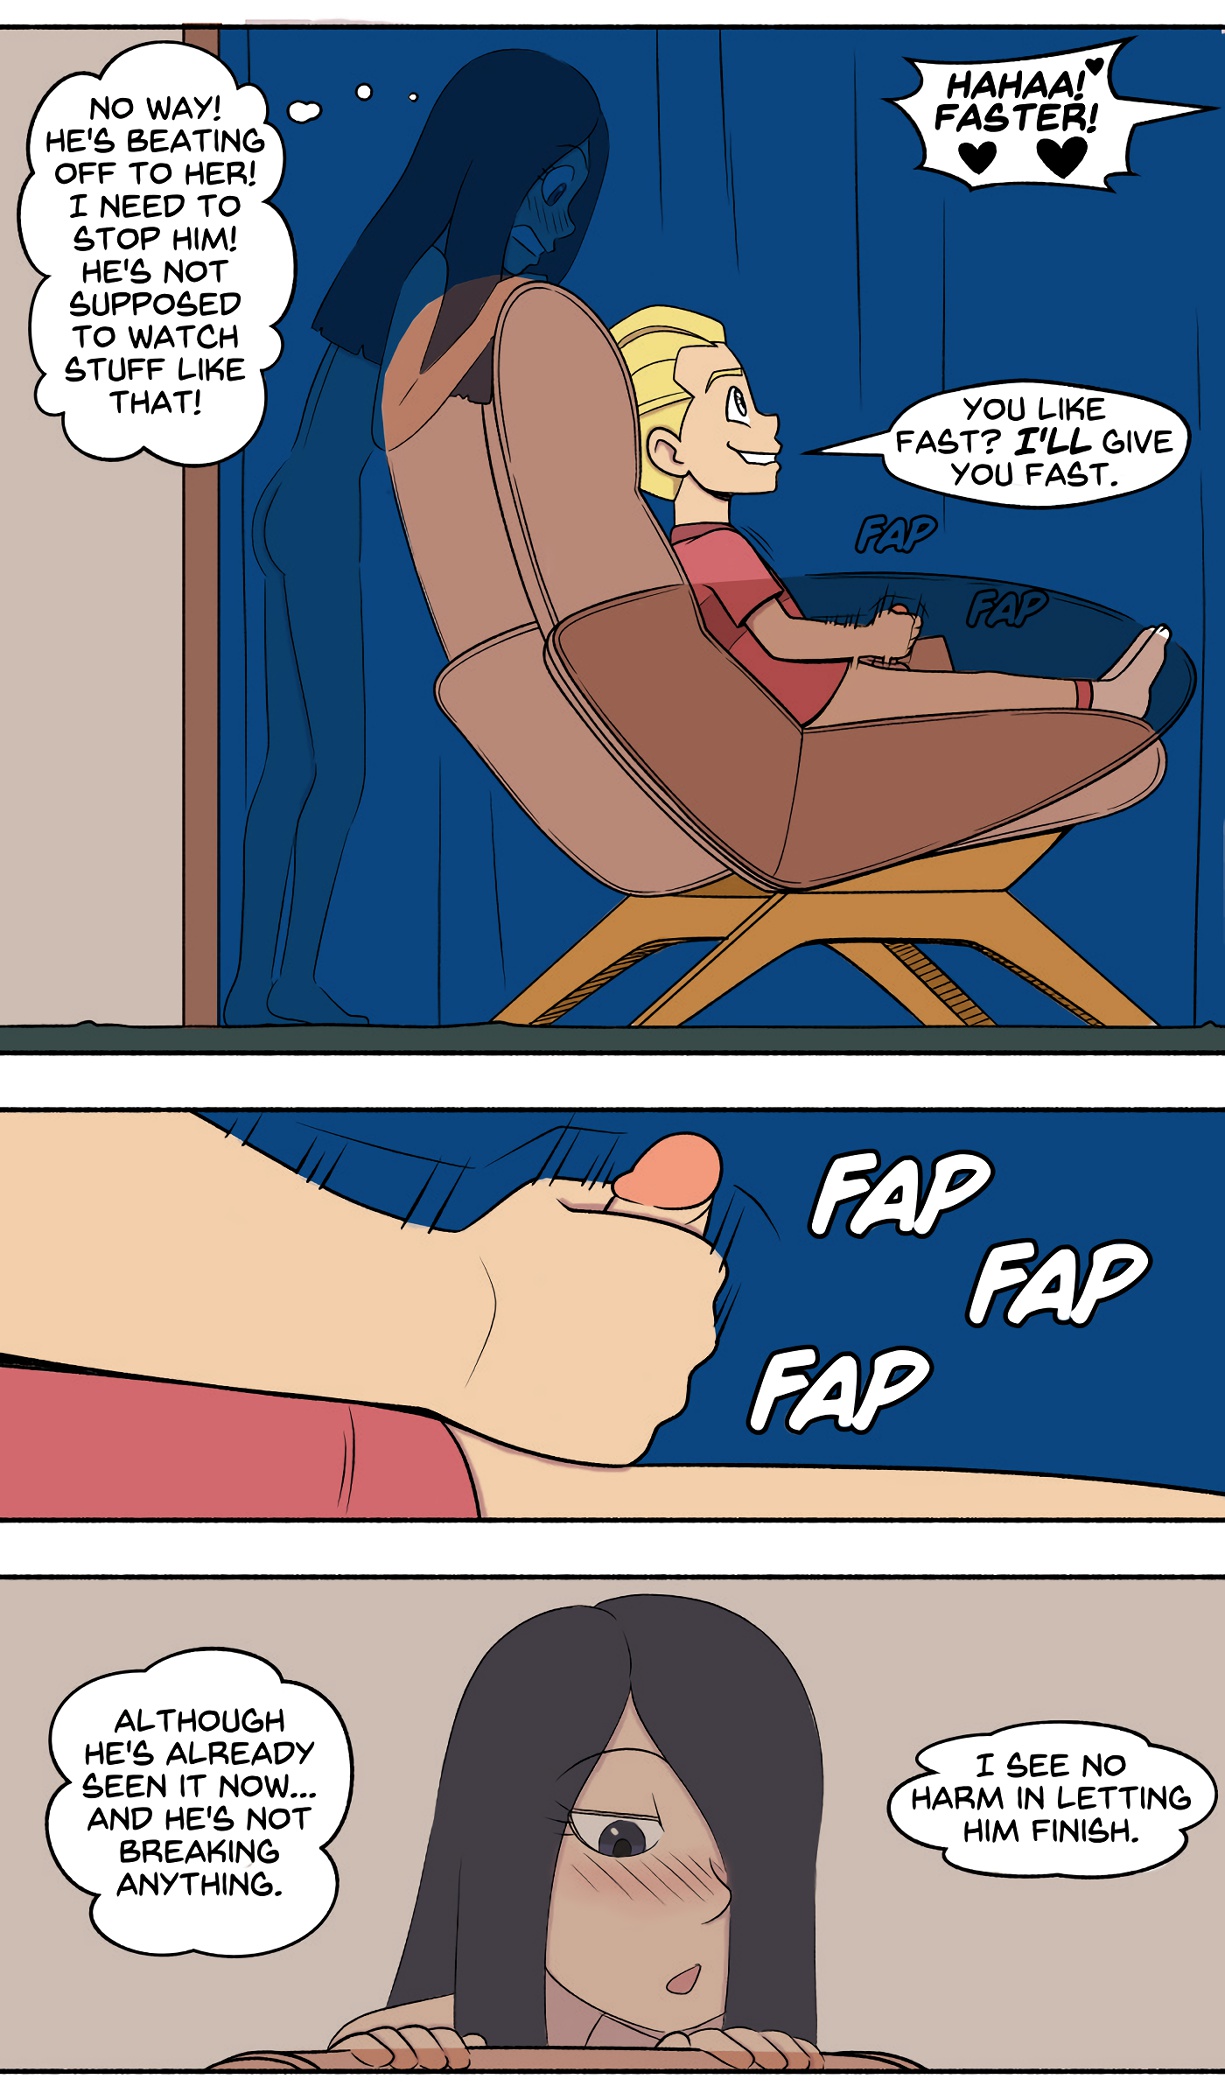 Supervision- Incognitymous- (The Incredibles)